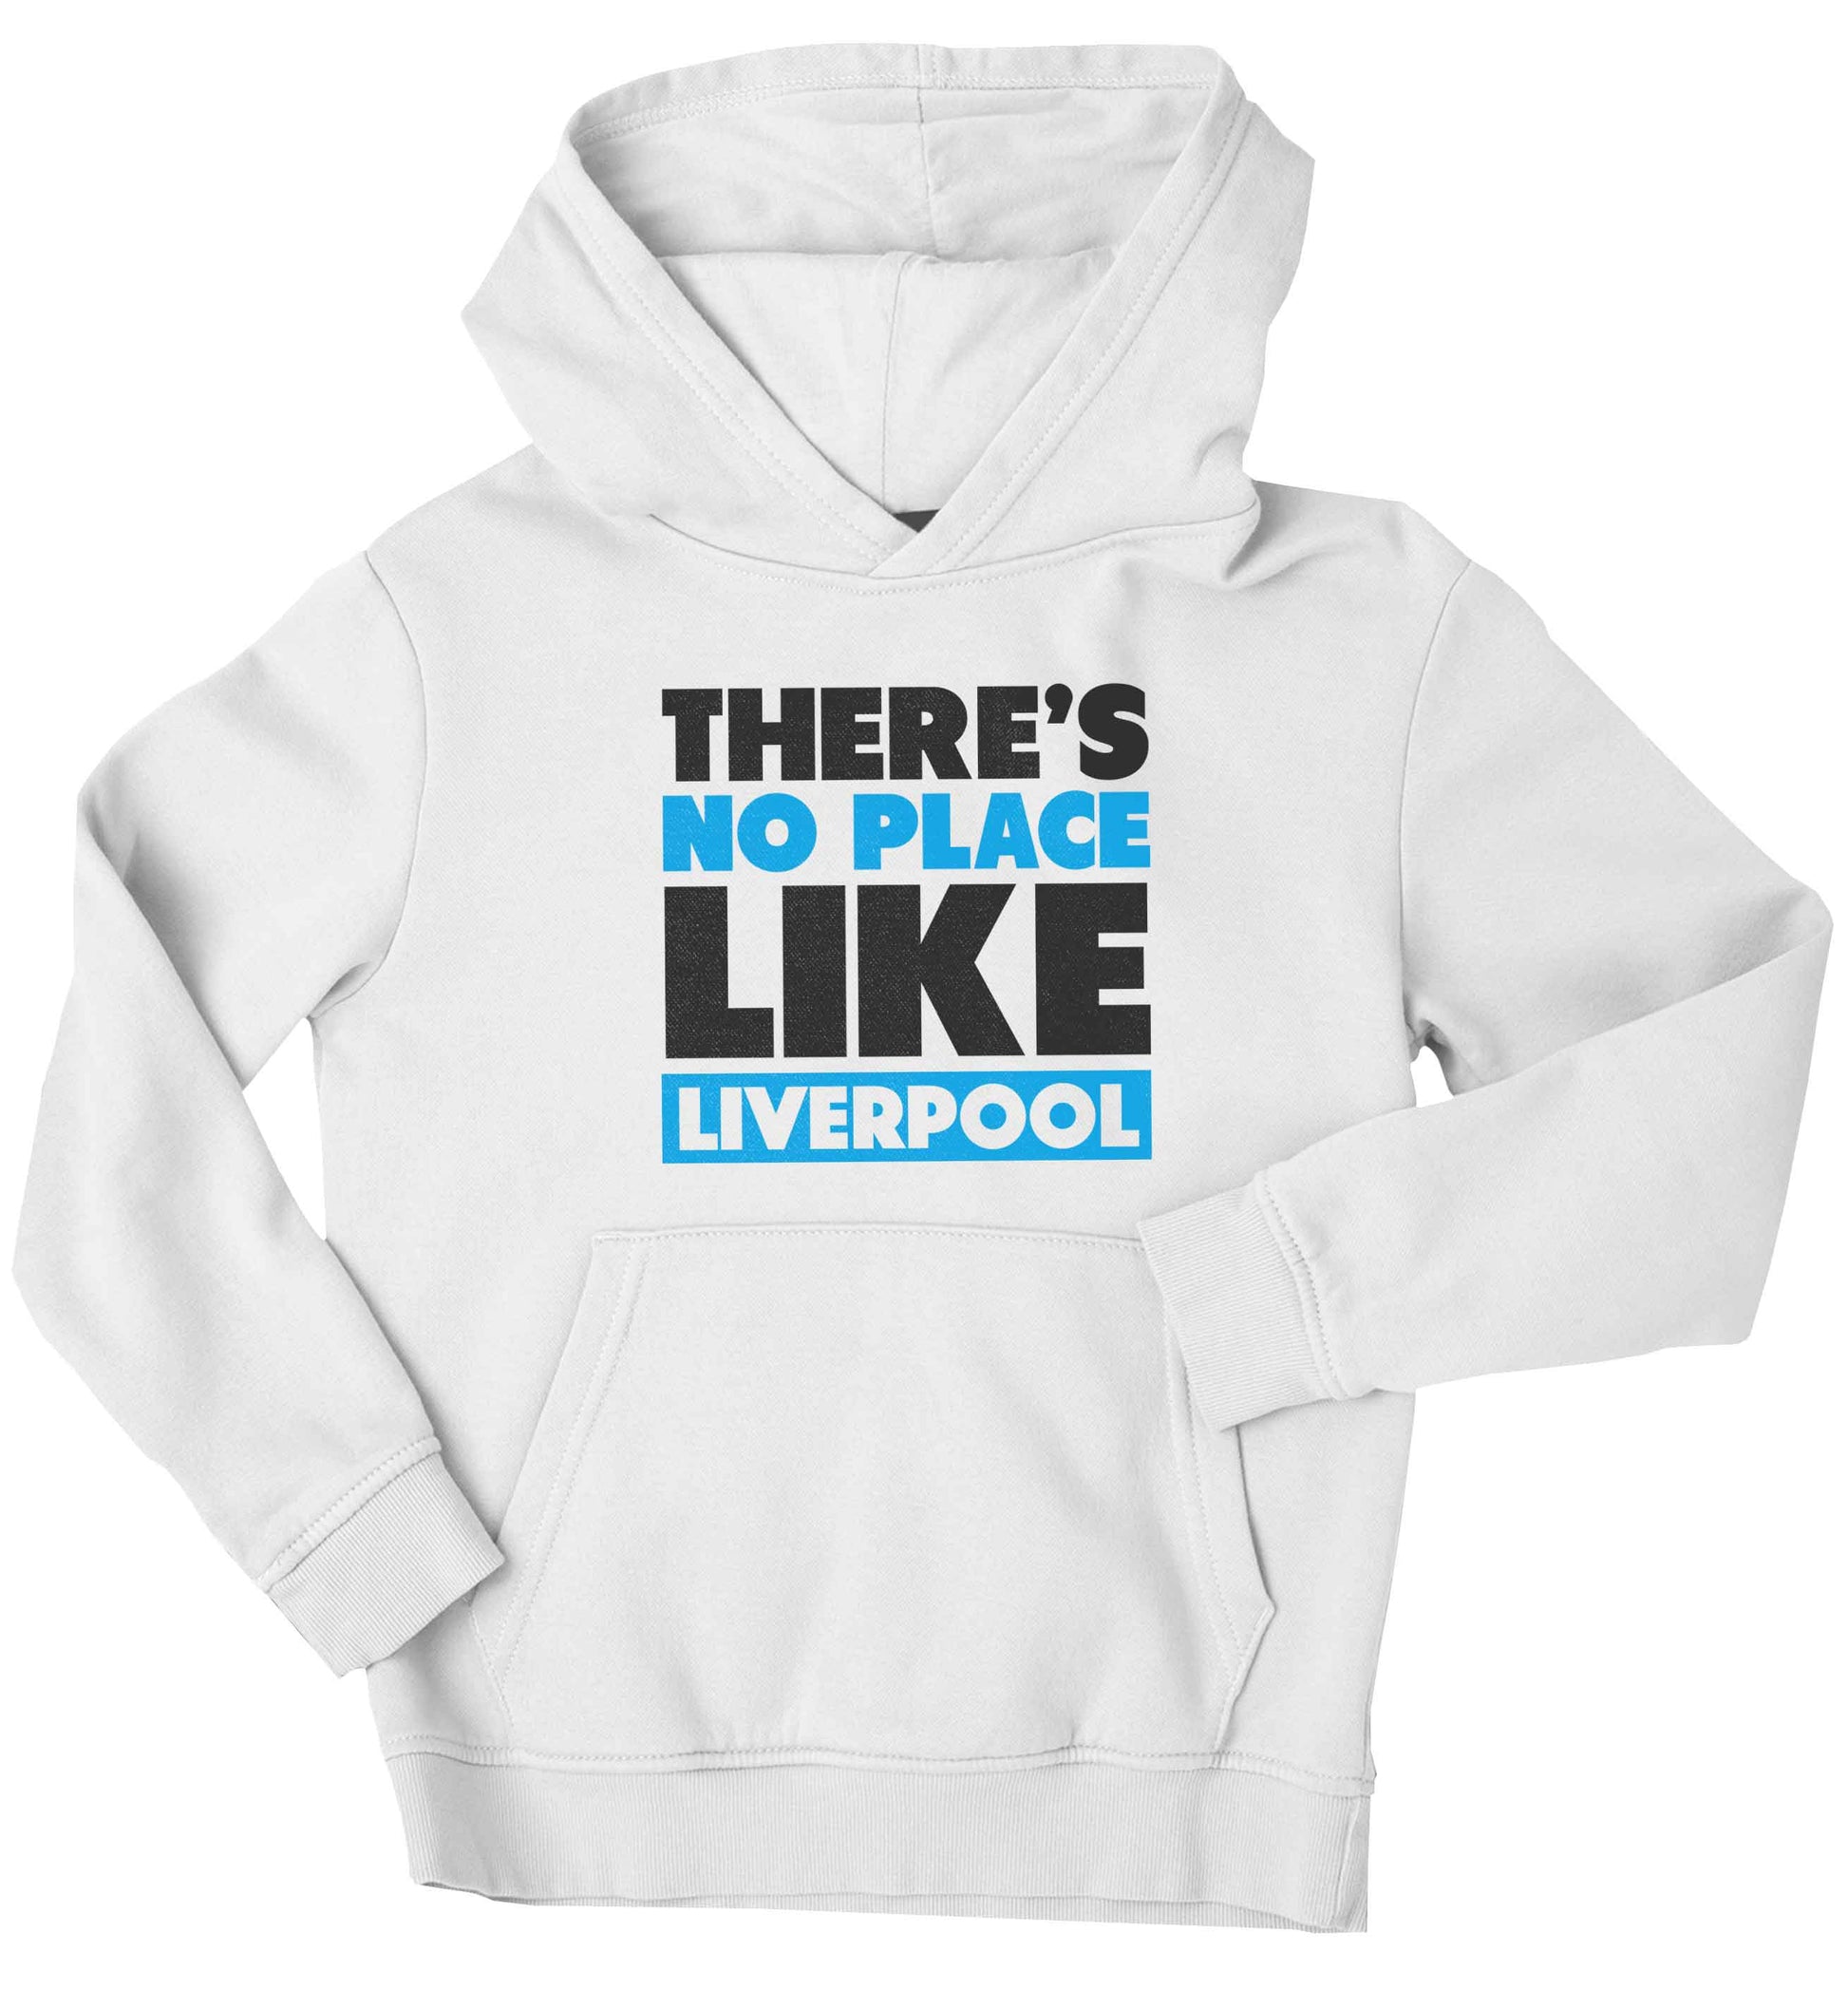 There's no place like Liverpool children's white hoodie 12-13 Years